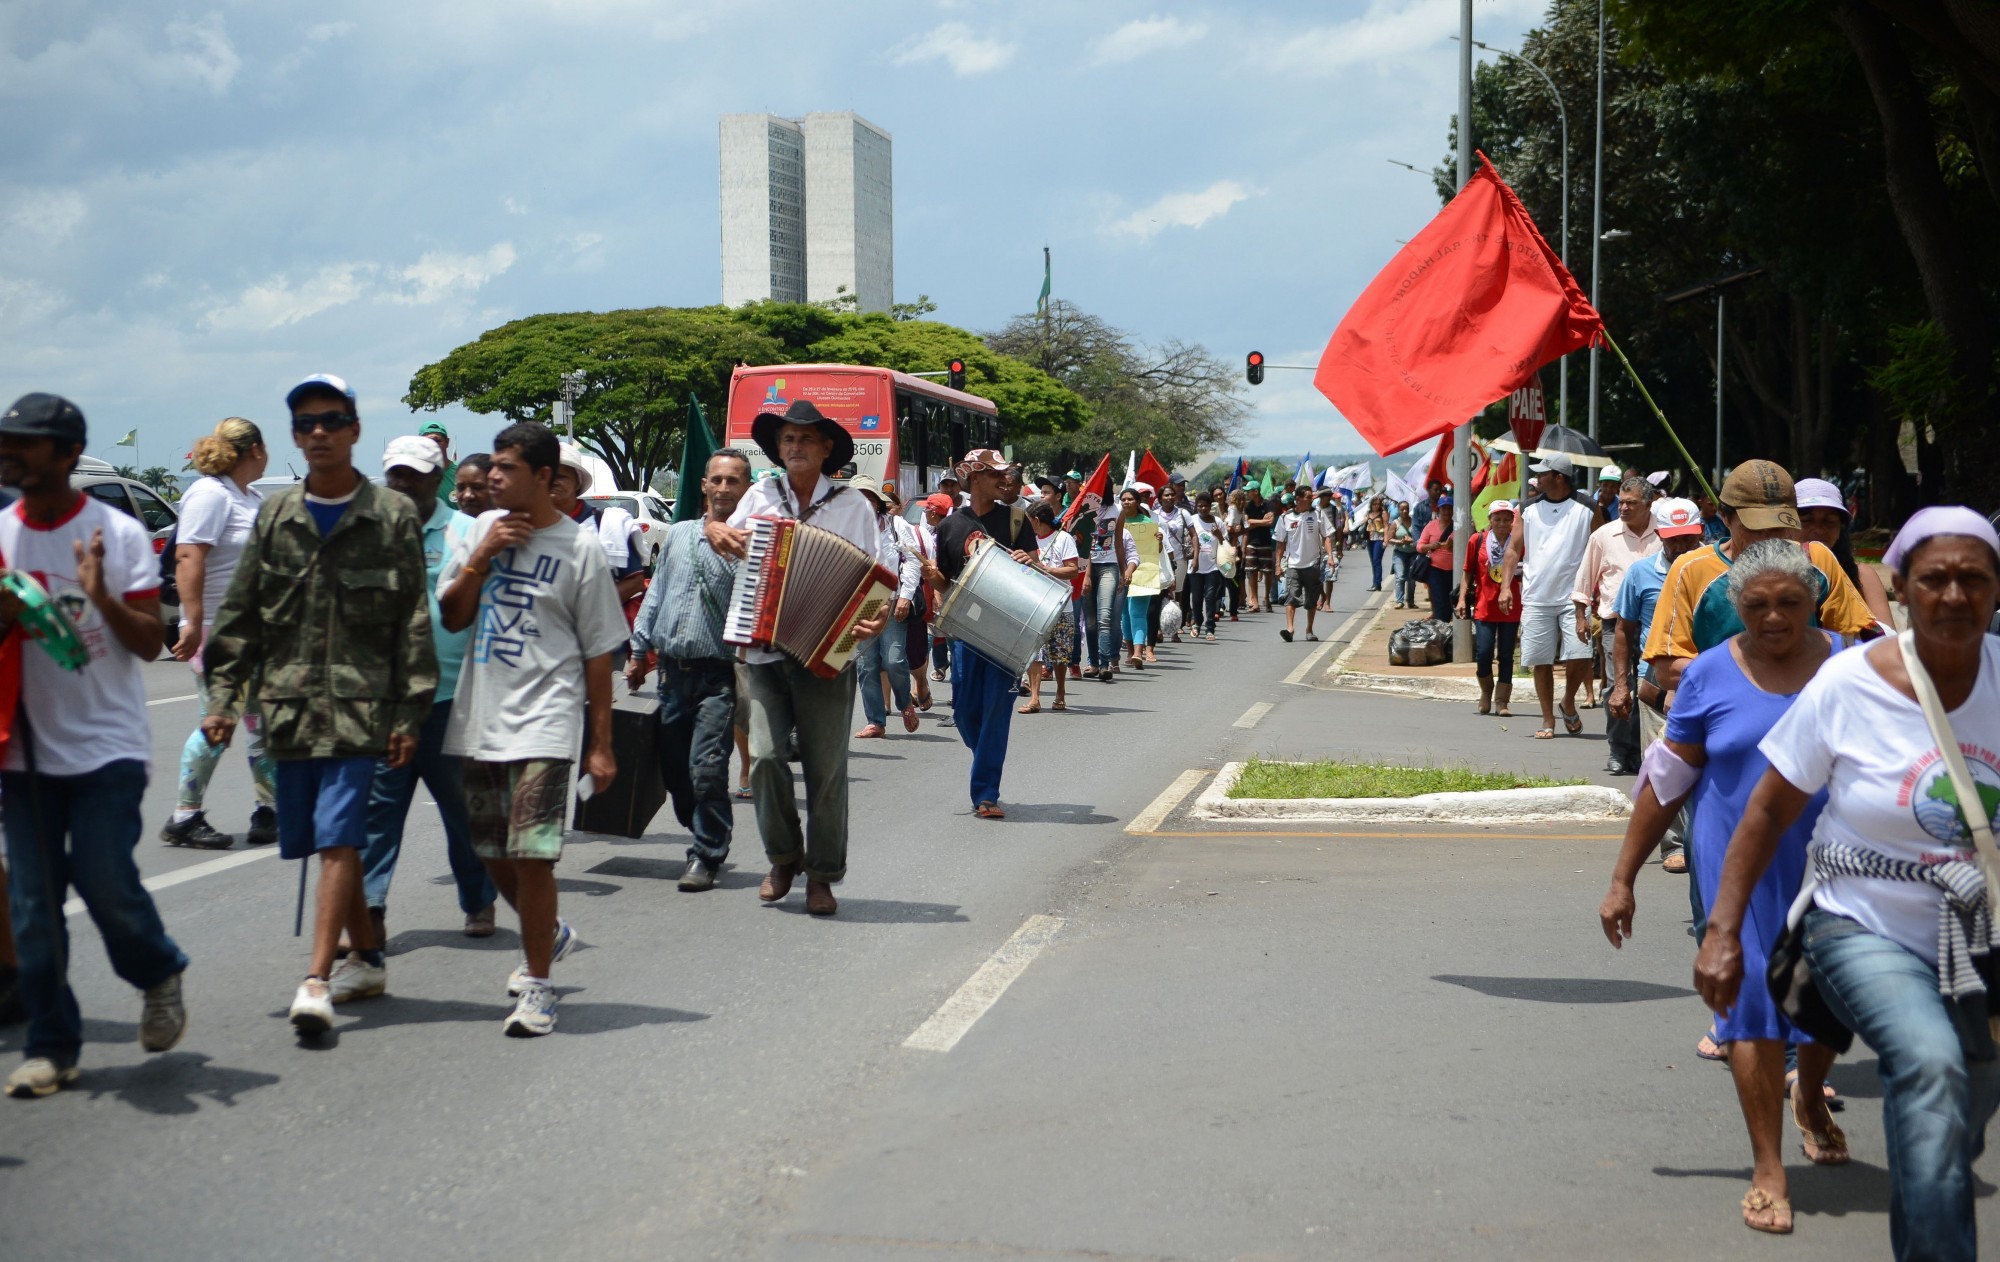 MST Landless March to Protest Brazil’s Agribusiness Model